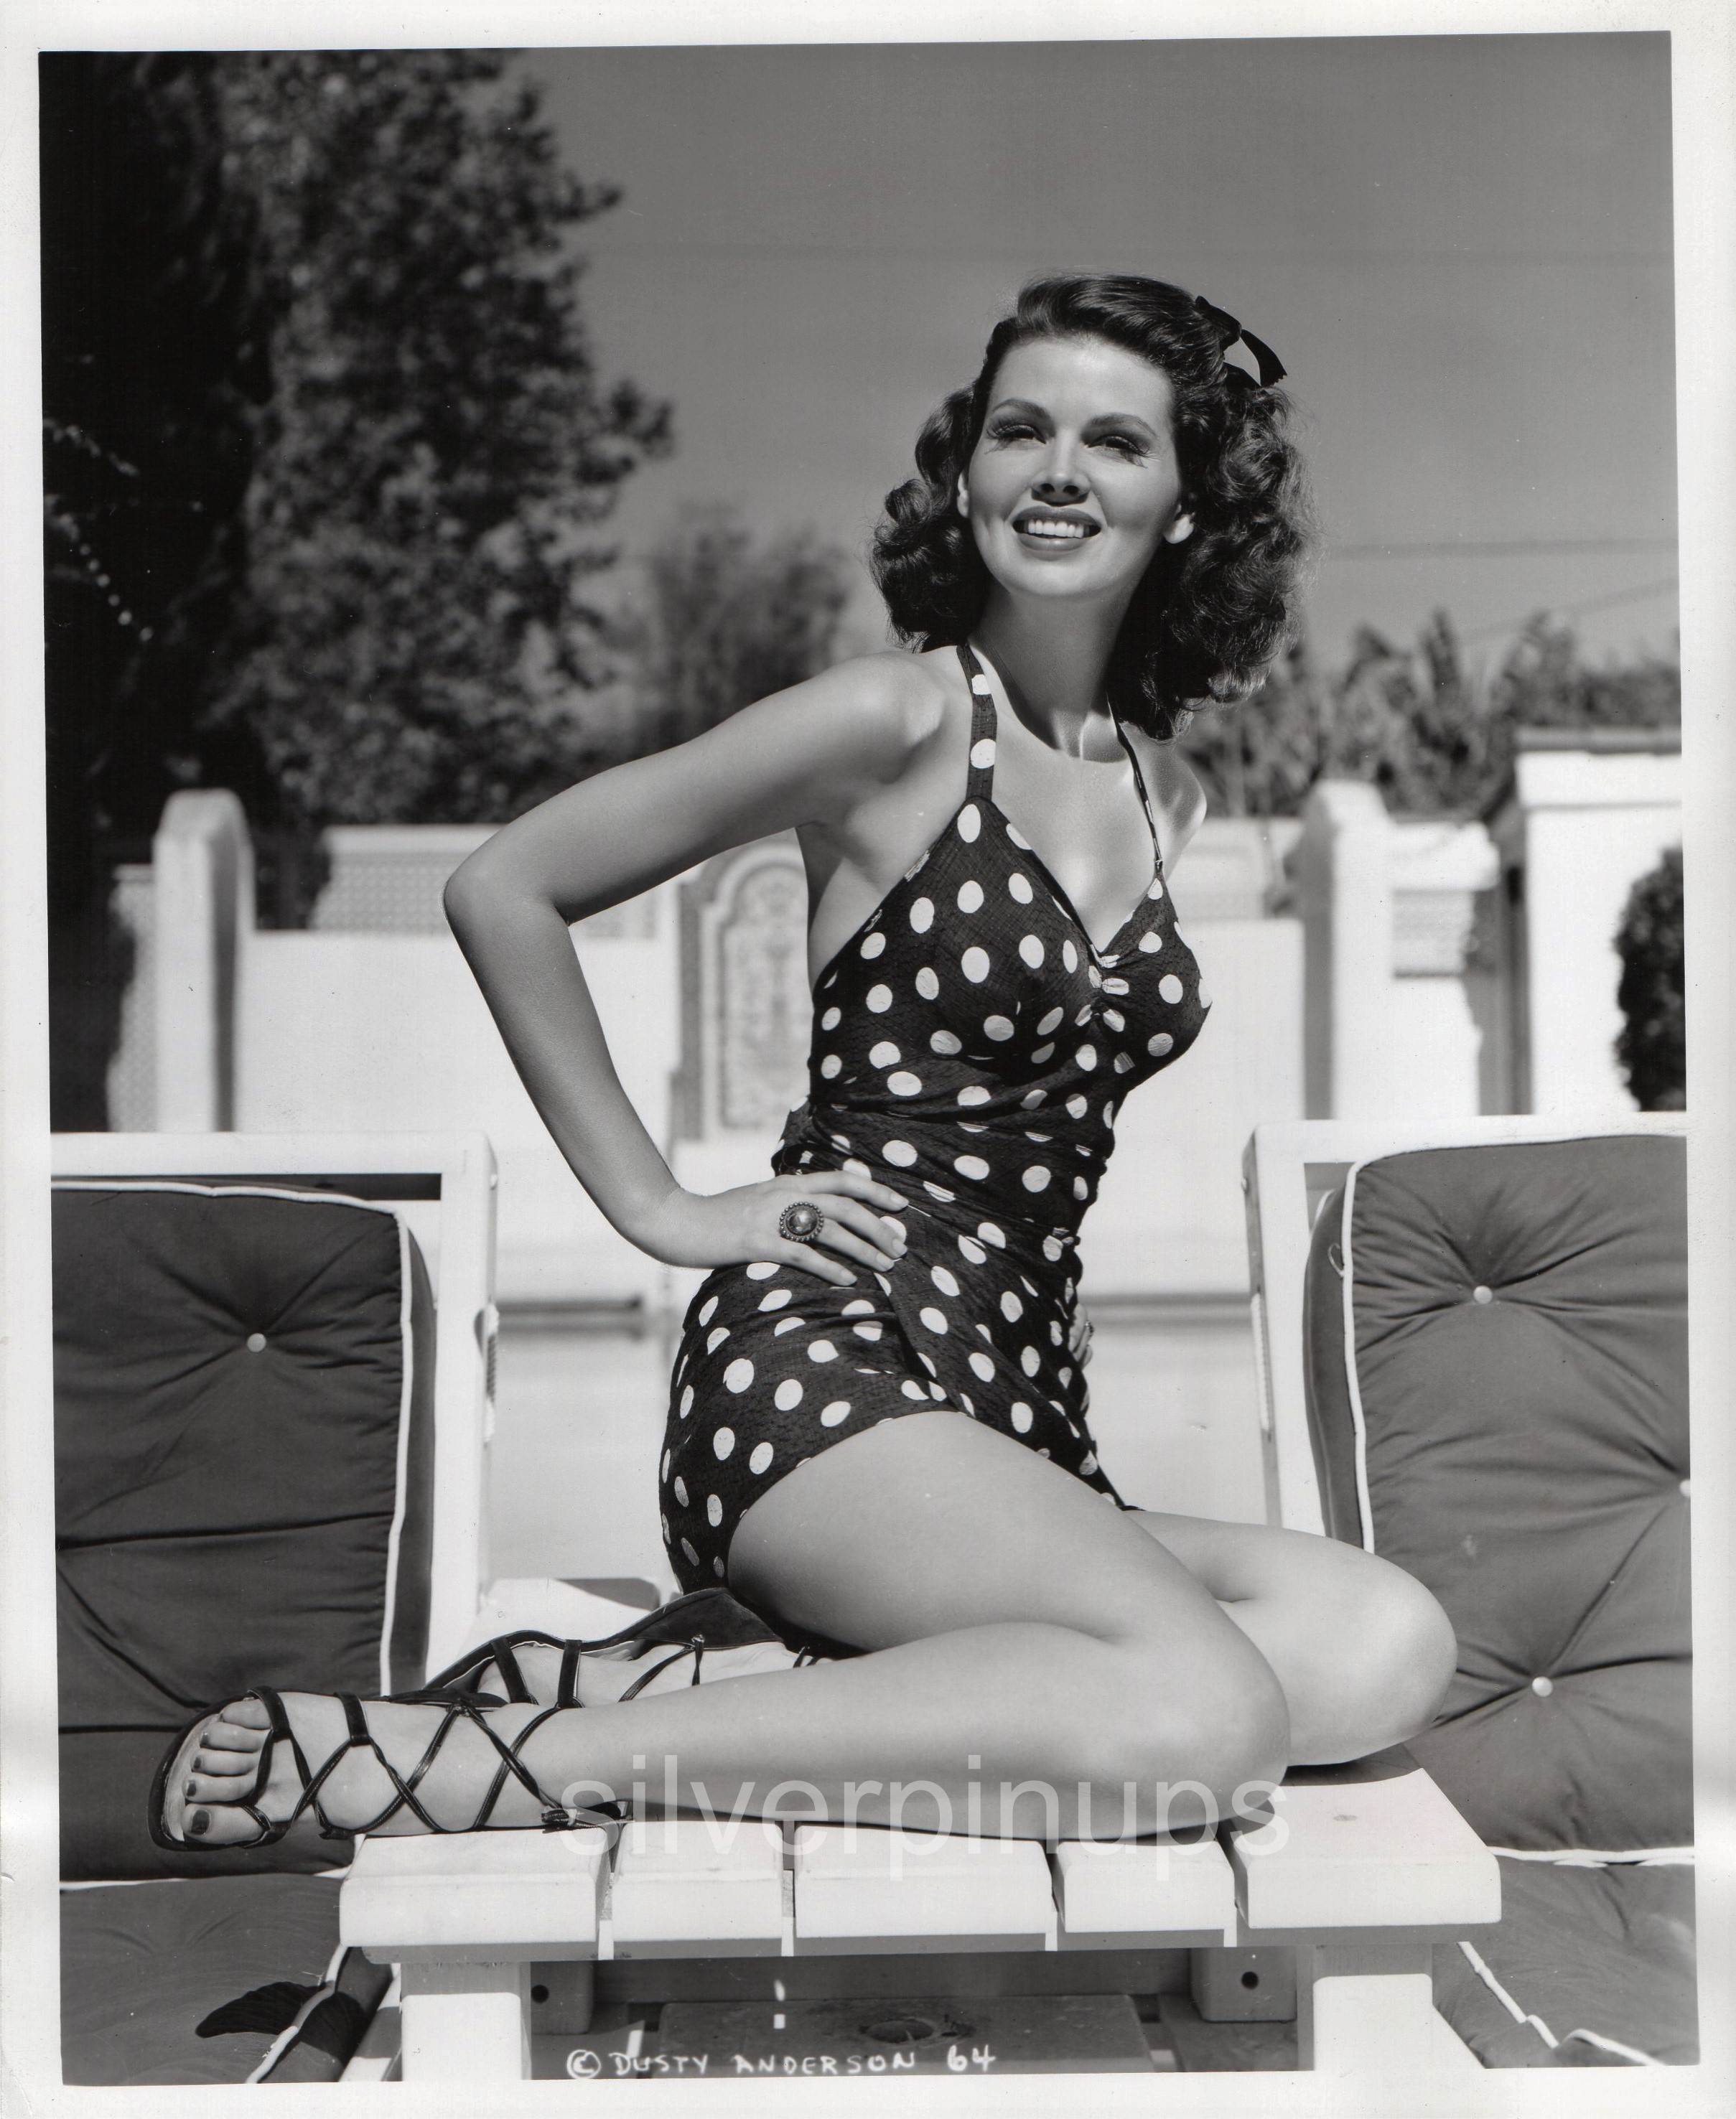 Orig Dusty Anderson In Polka Dot Swimsuit Pin Up Glamour Portrait Film Debut Silverpinups